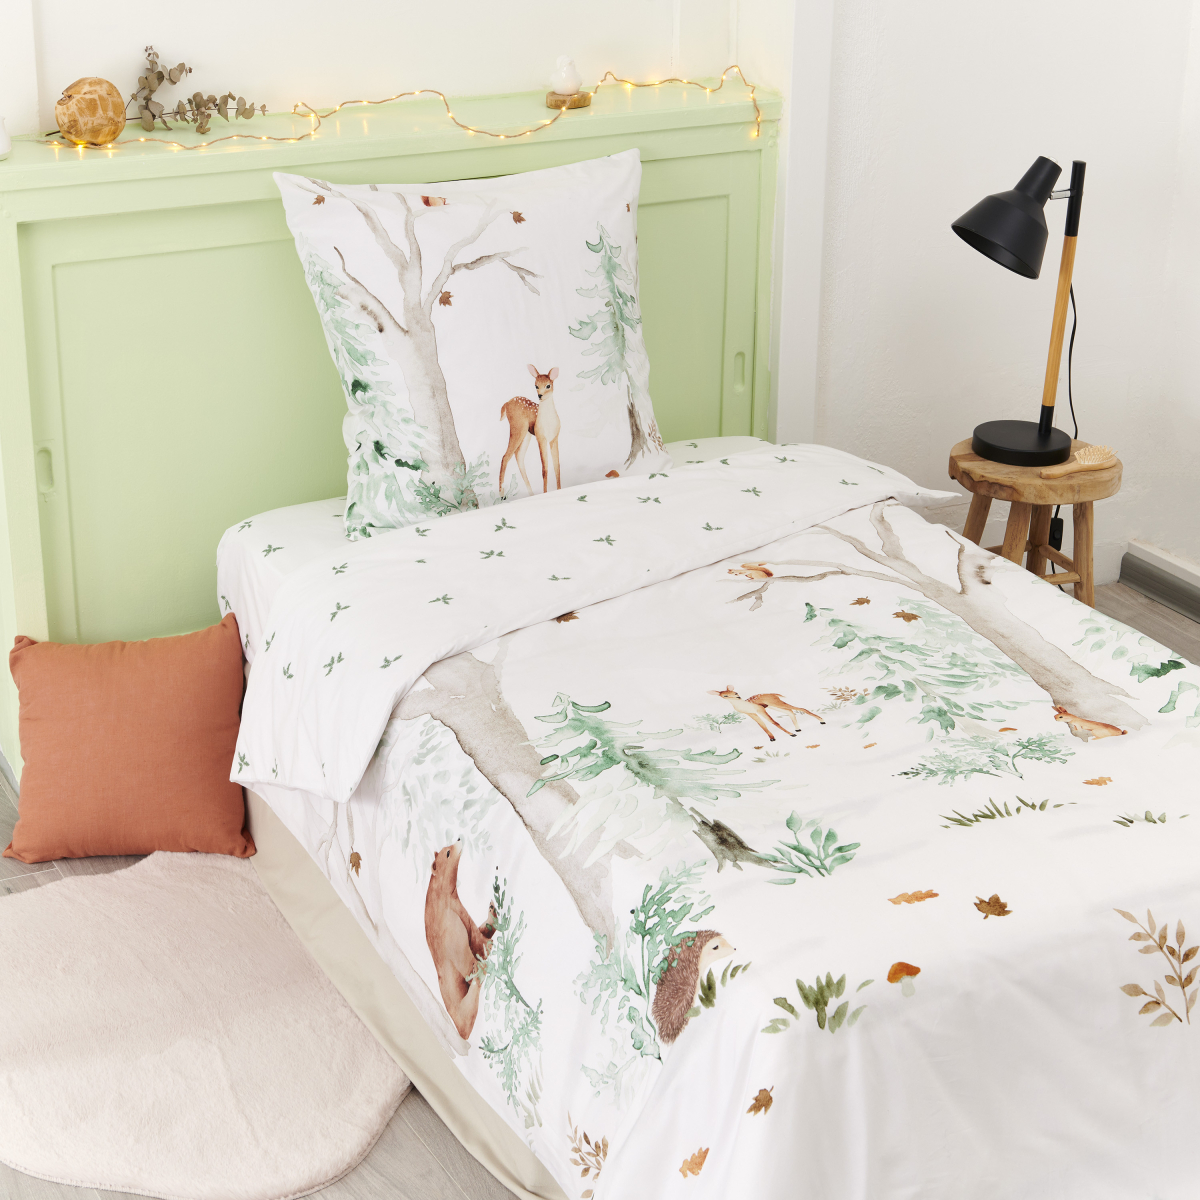 Fawn fitted sheet - Cotton percale